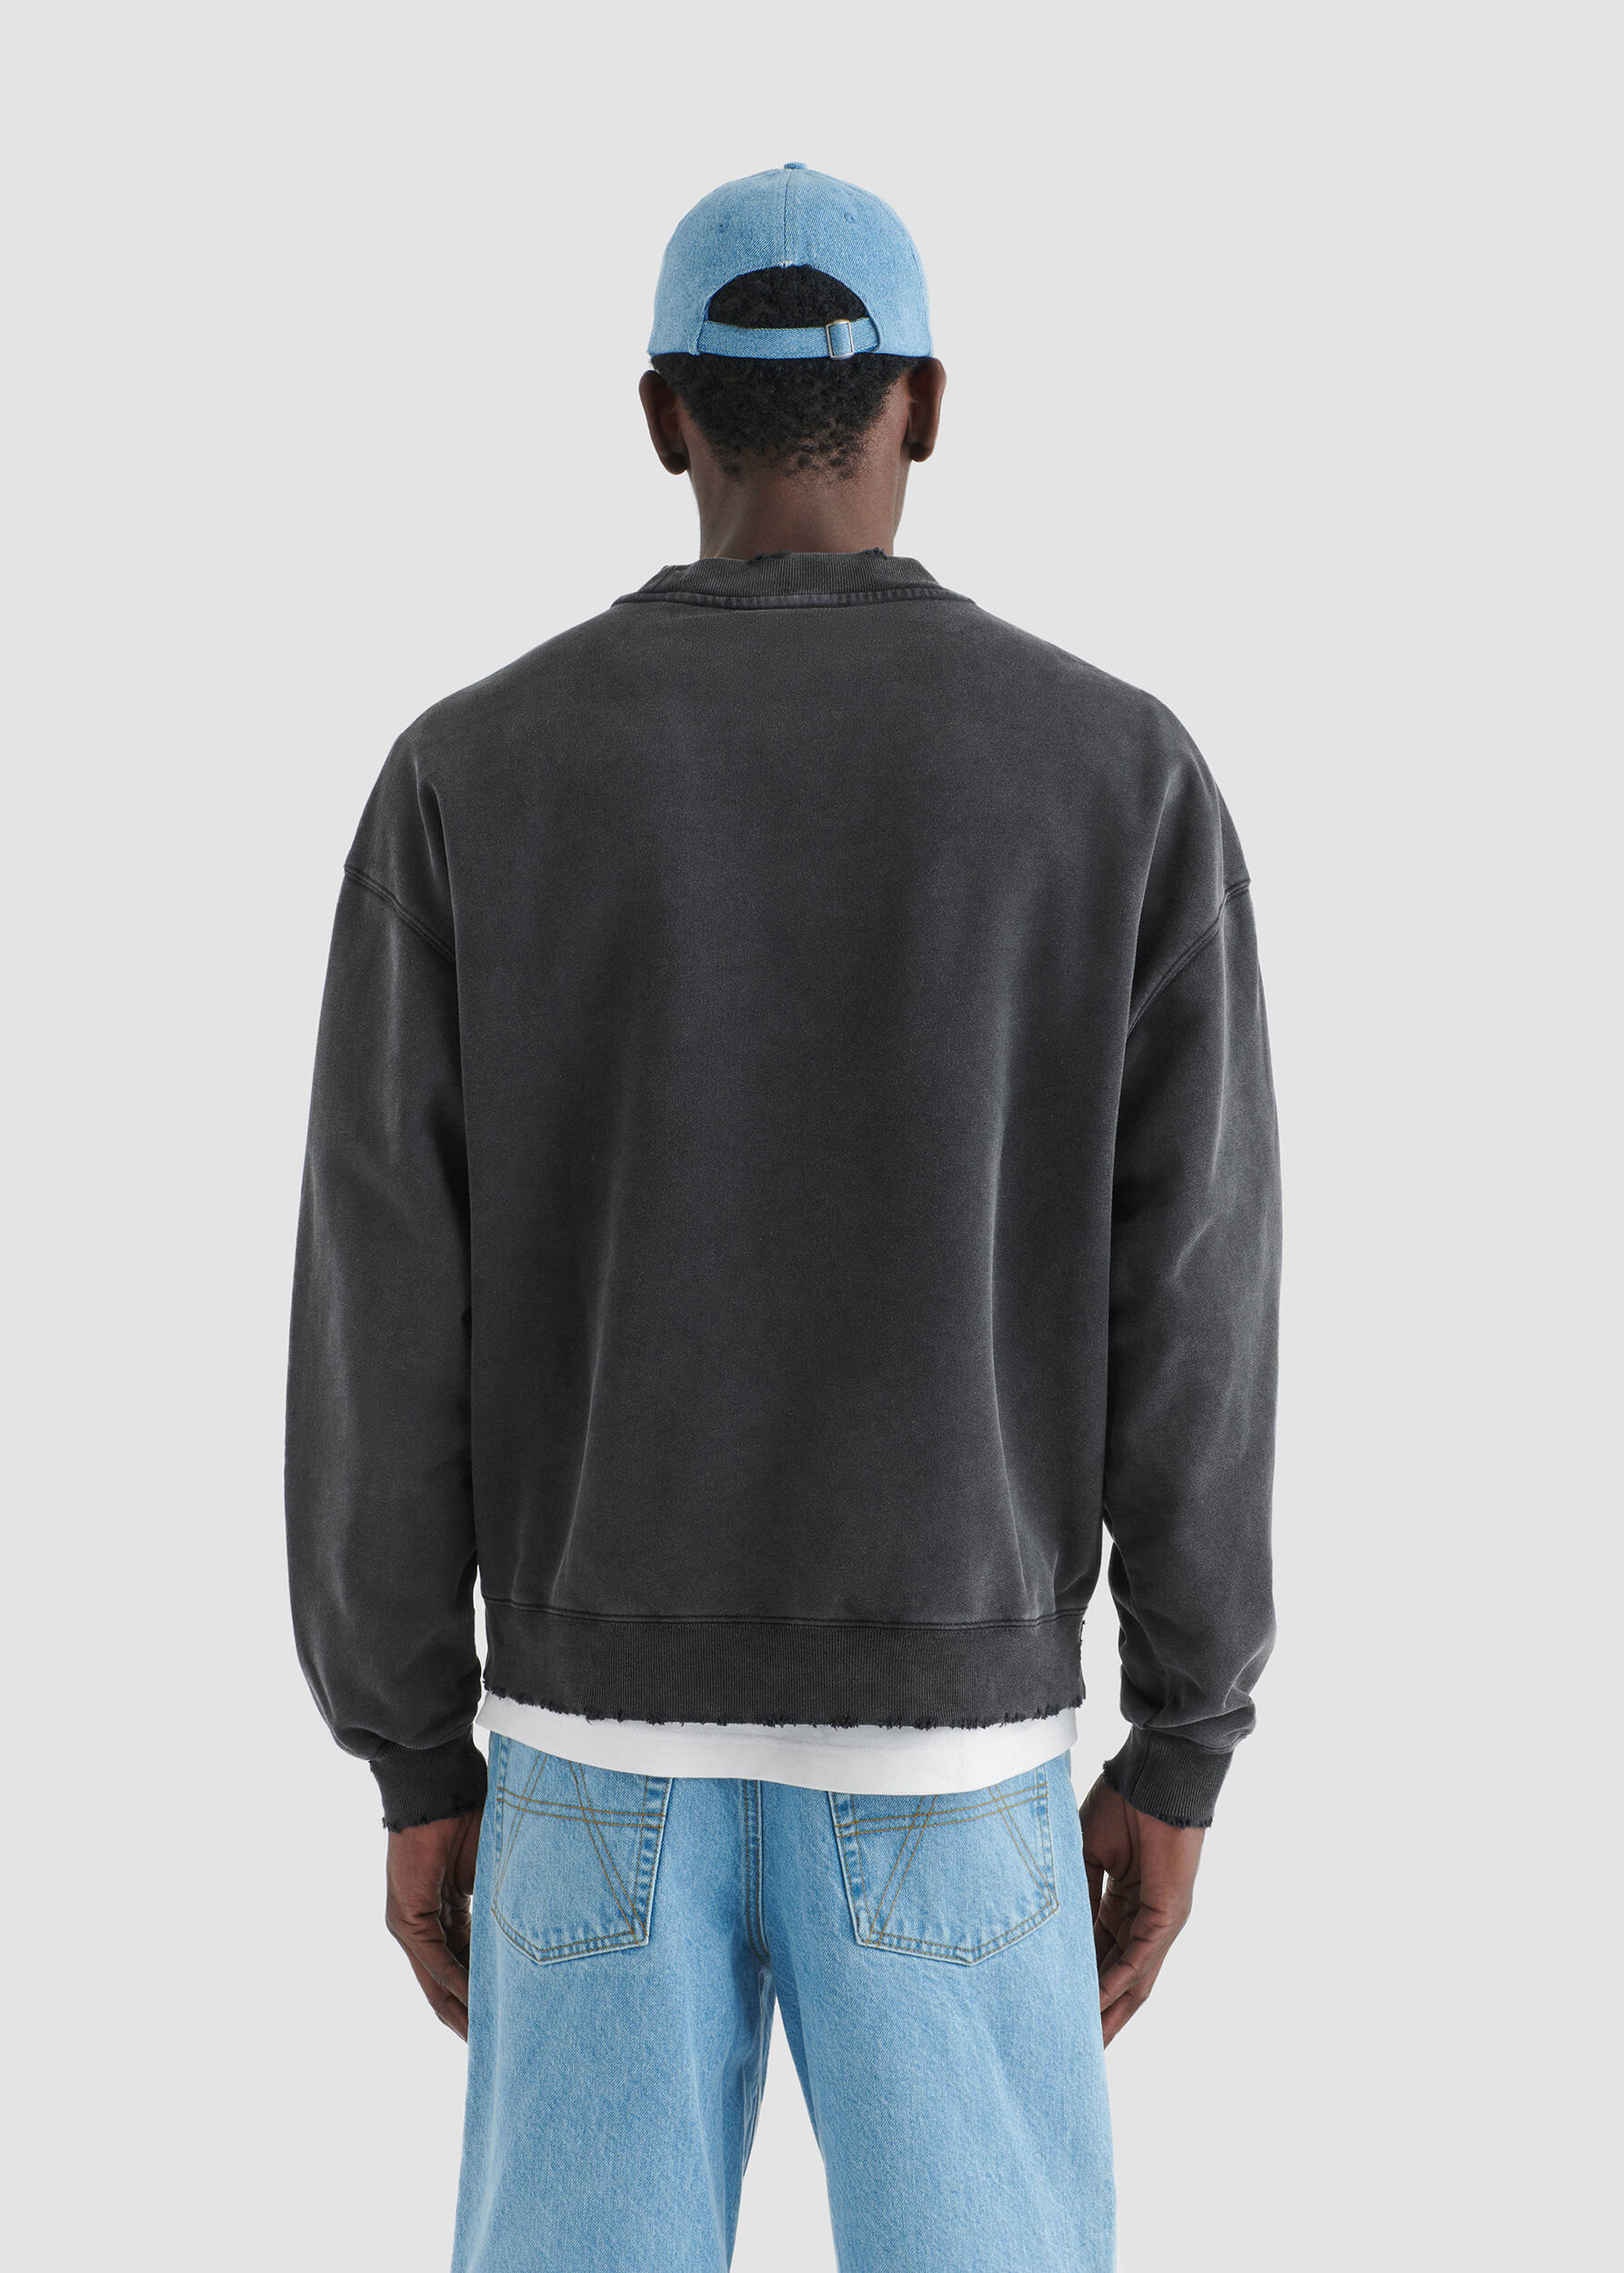 Wes Distressed Sweater